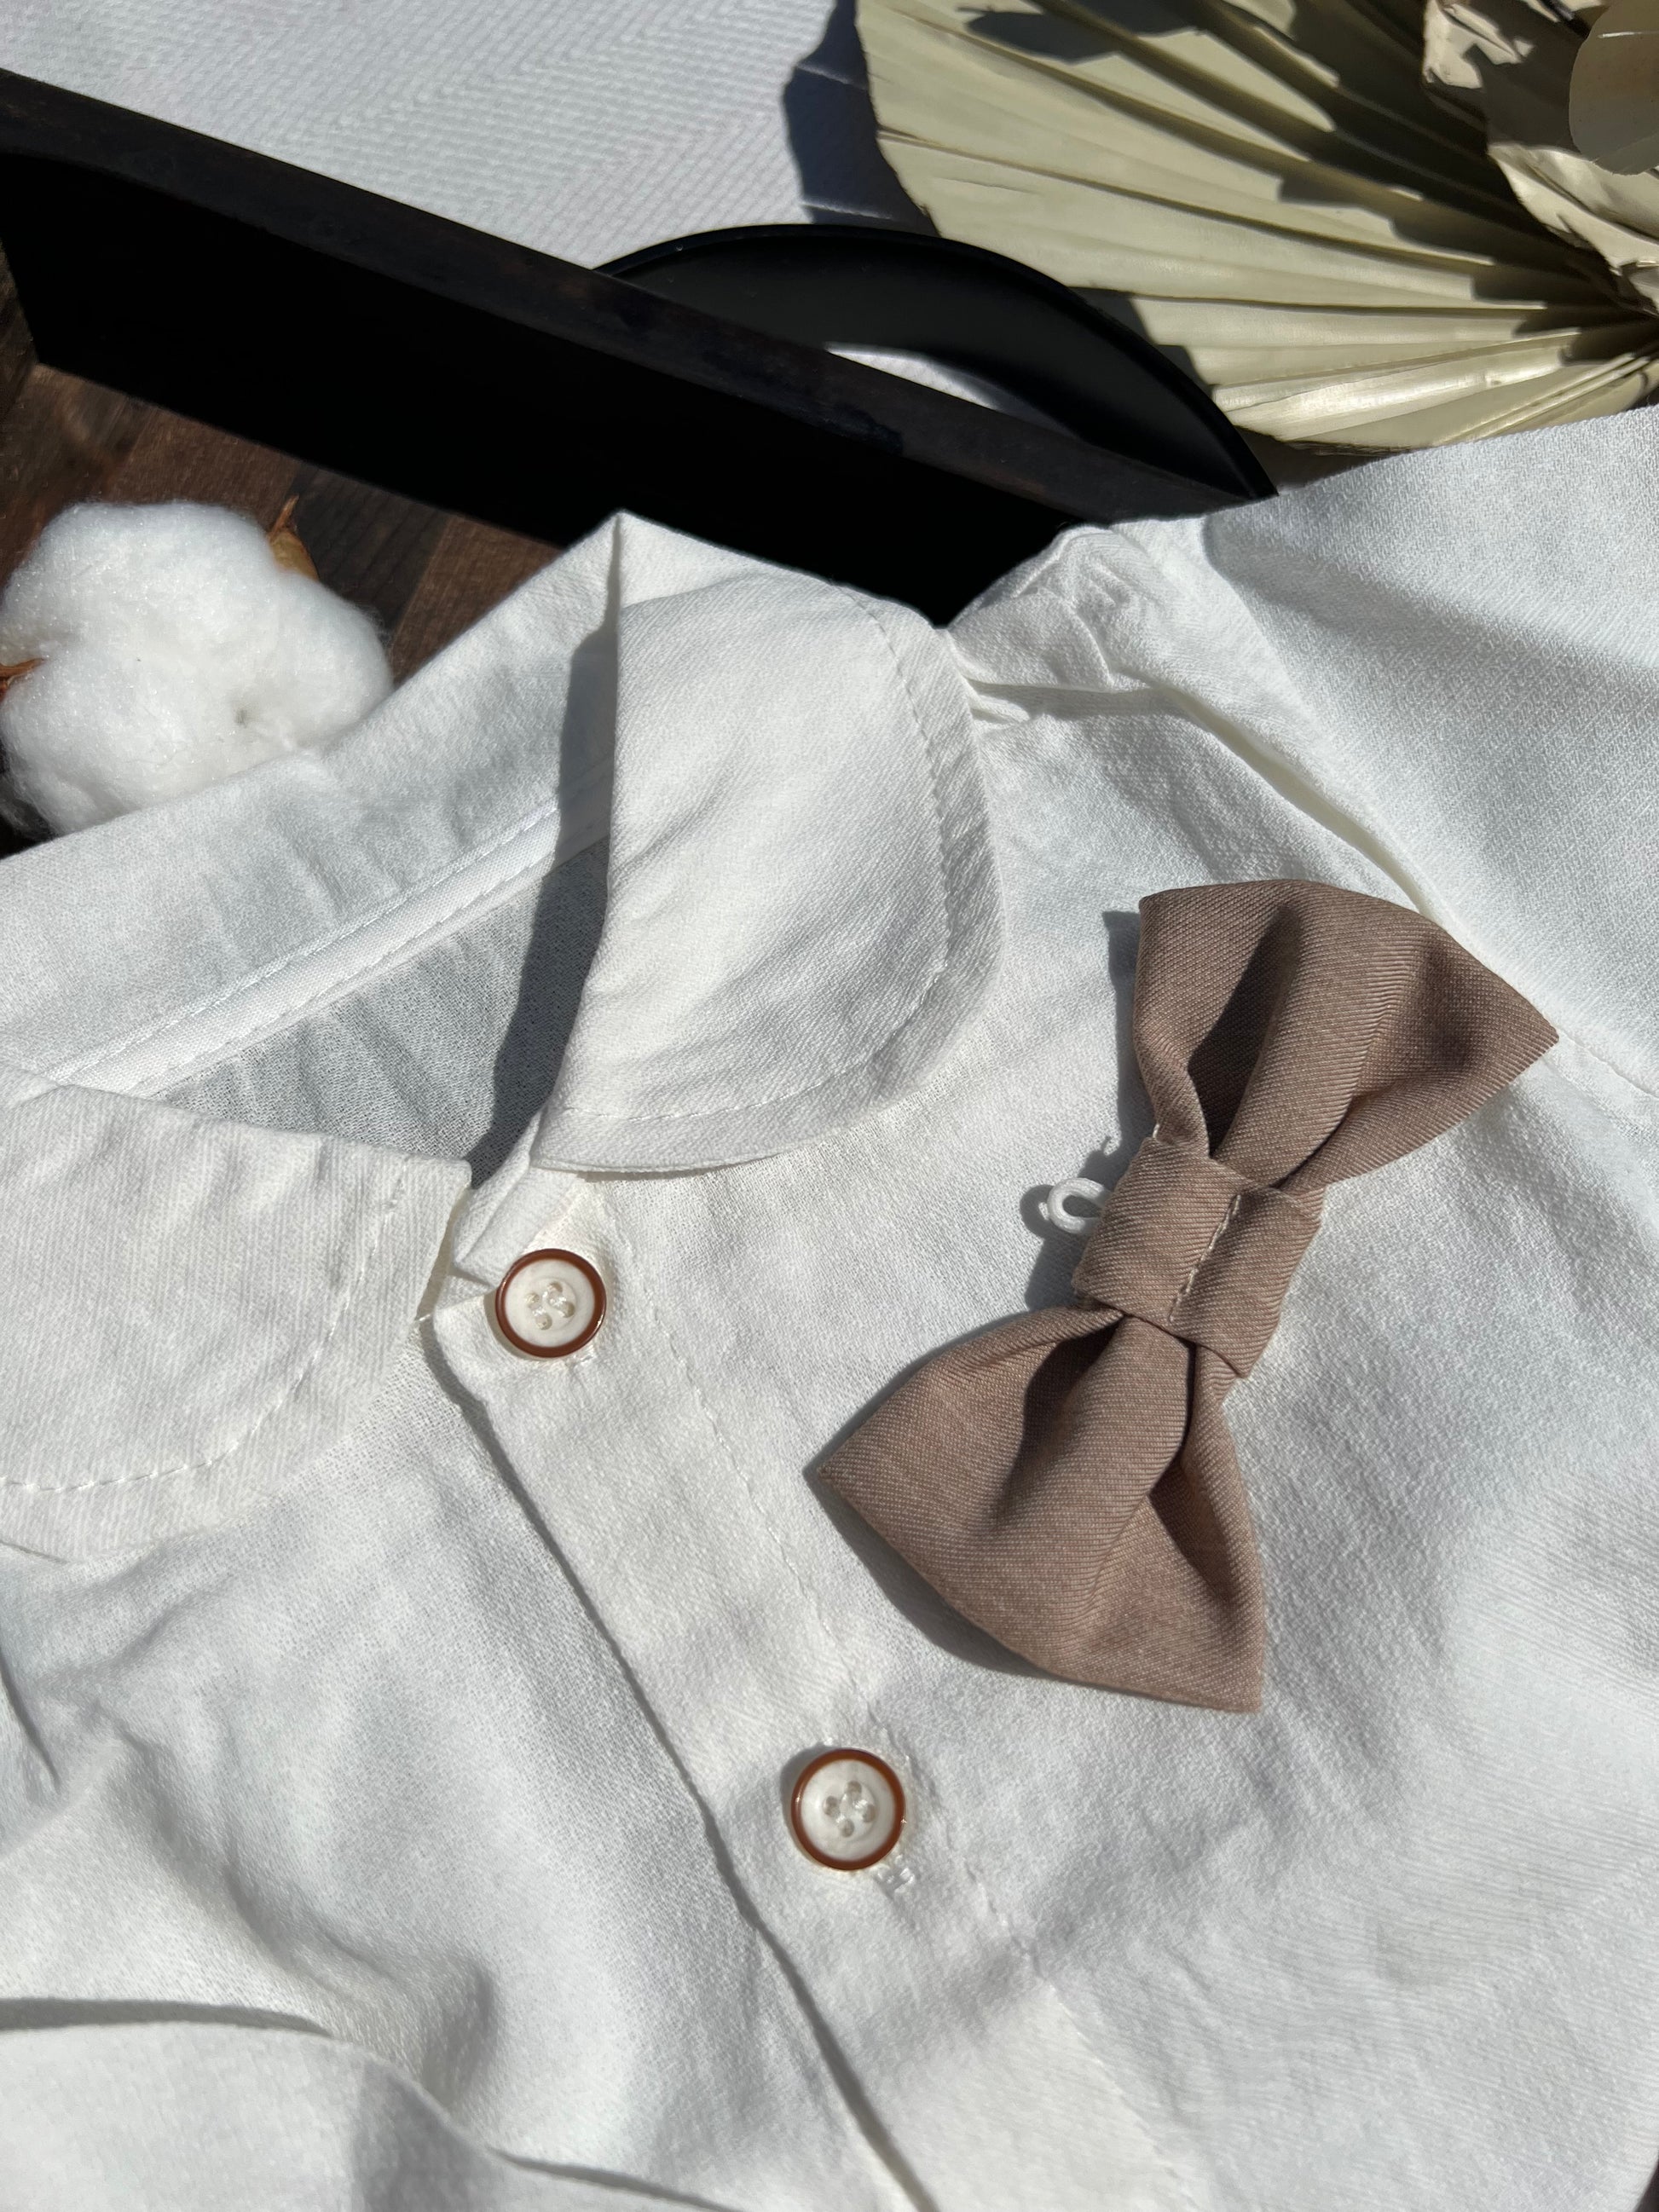 Formal Baby White Button-up Dress Shirt and Cappuccino Colored Bow Tie